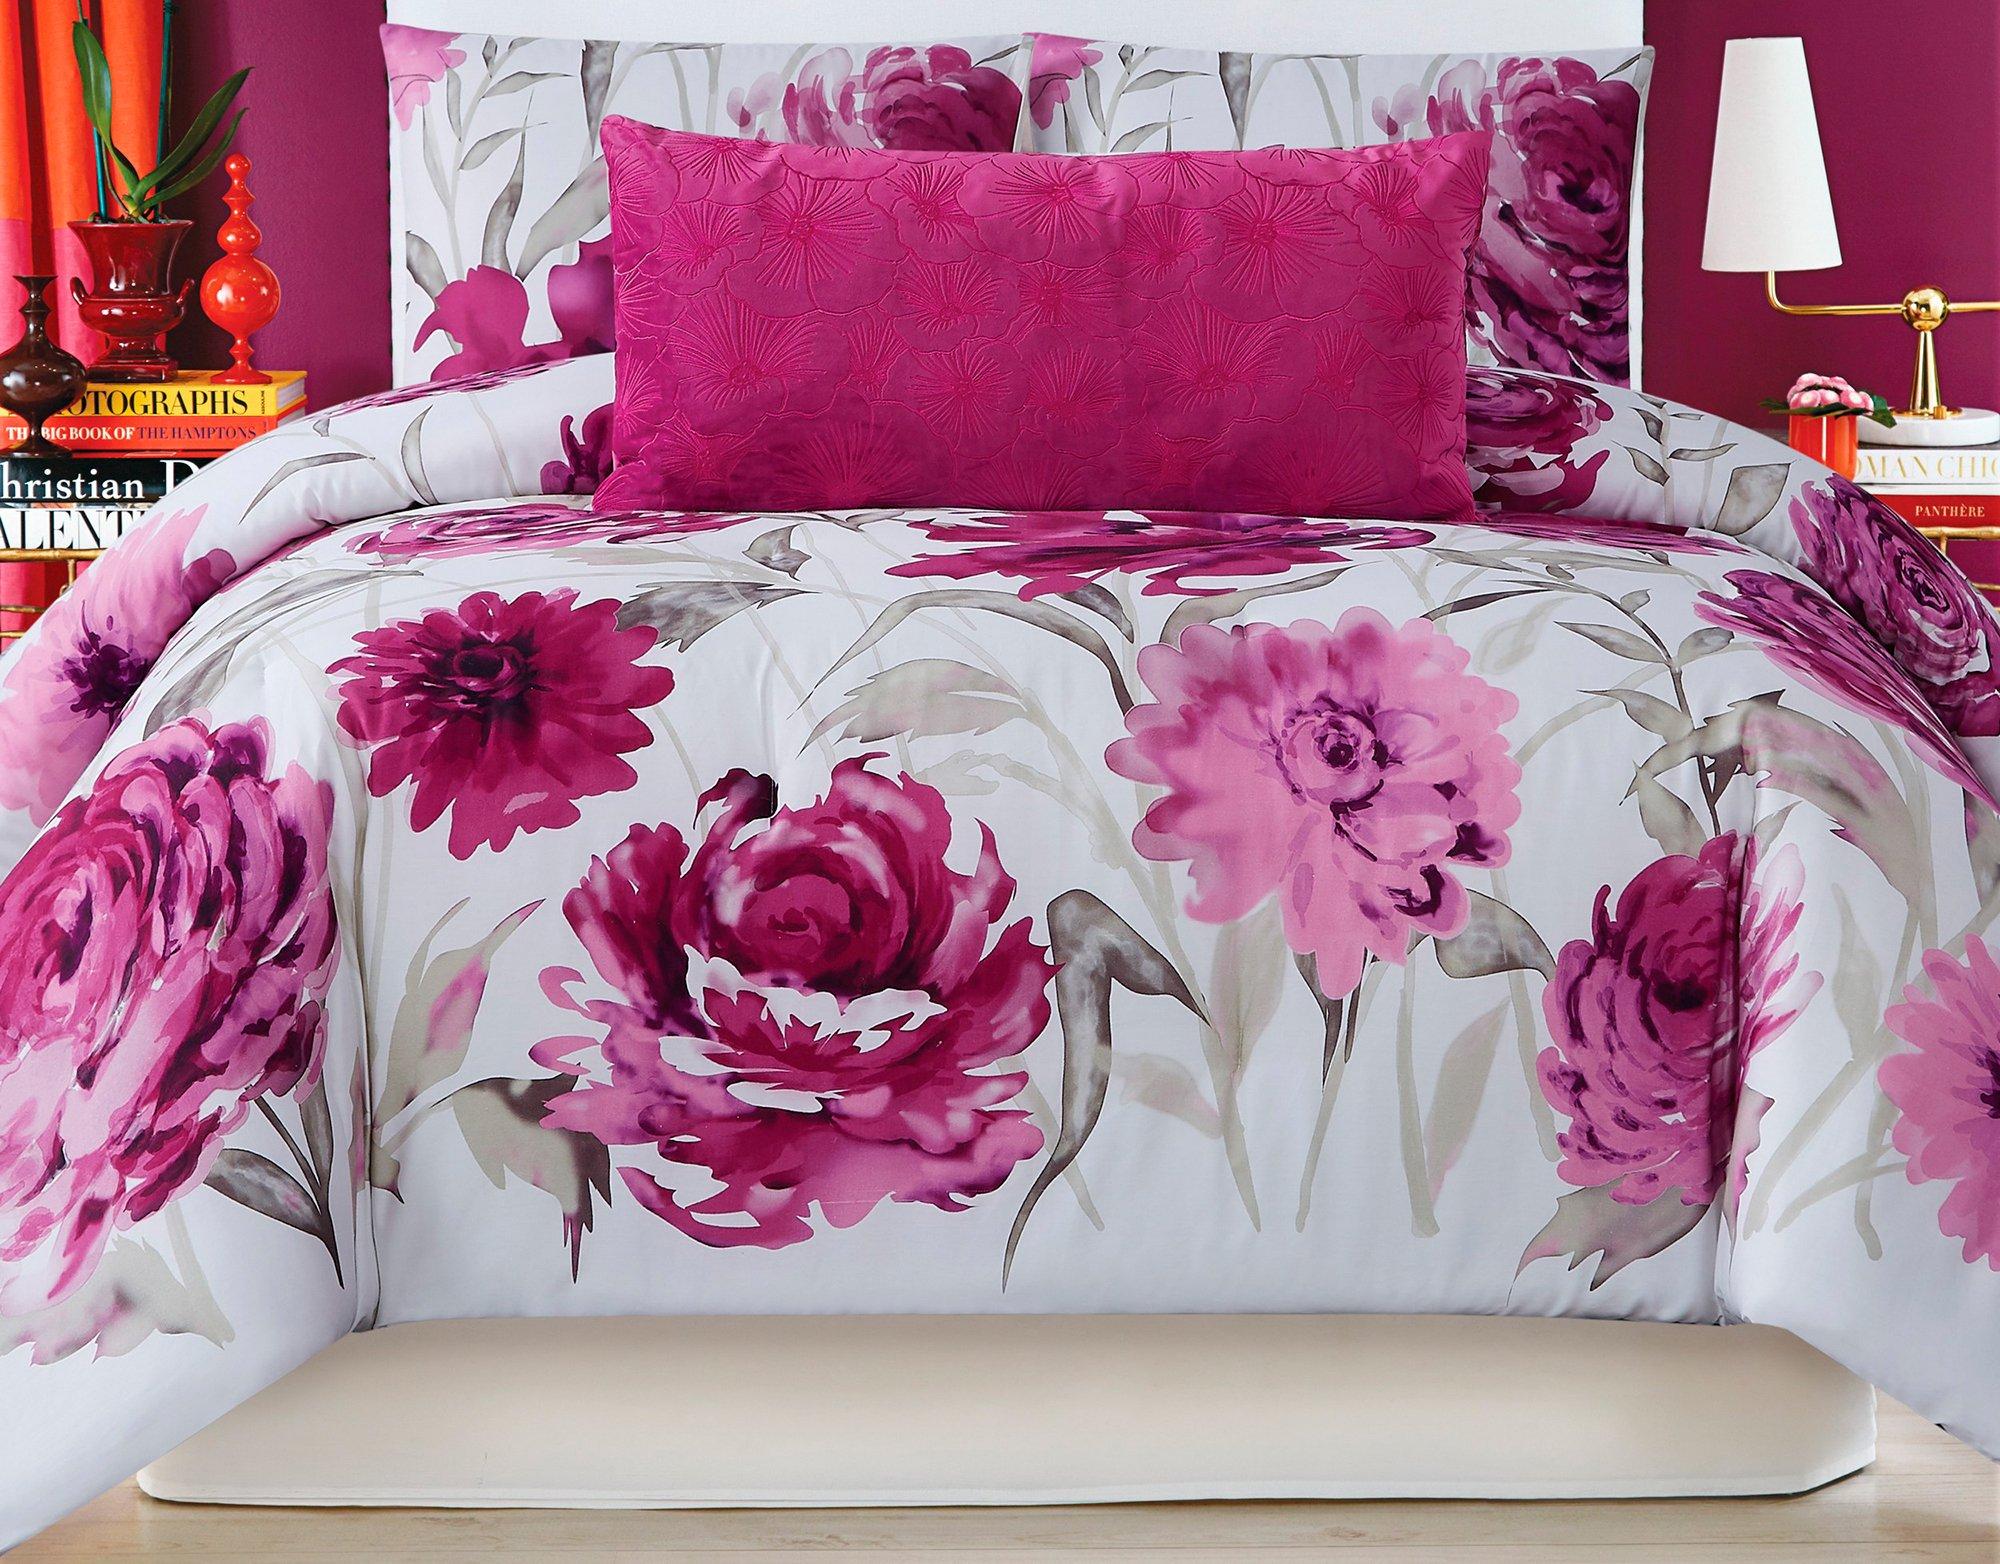 Christian Siriano NY Remy Floral Comforter Set